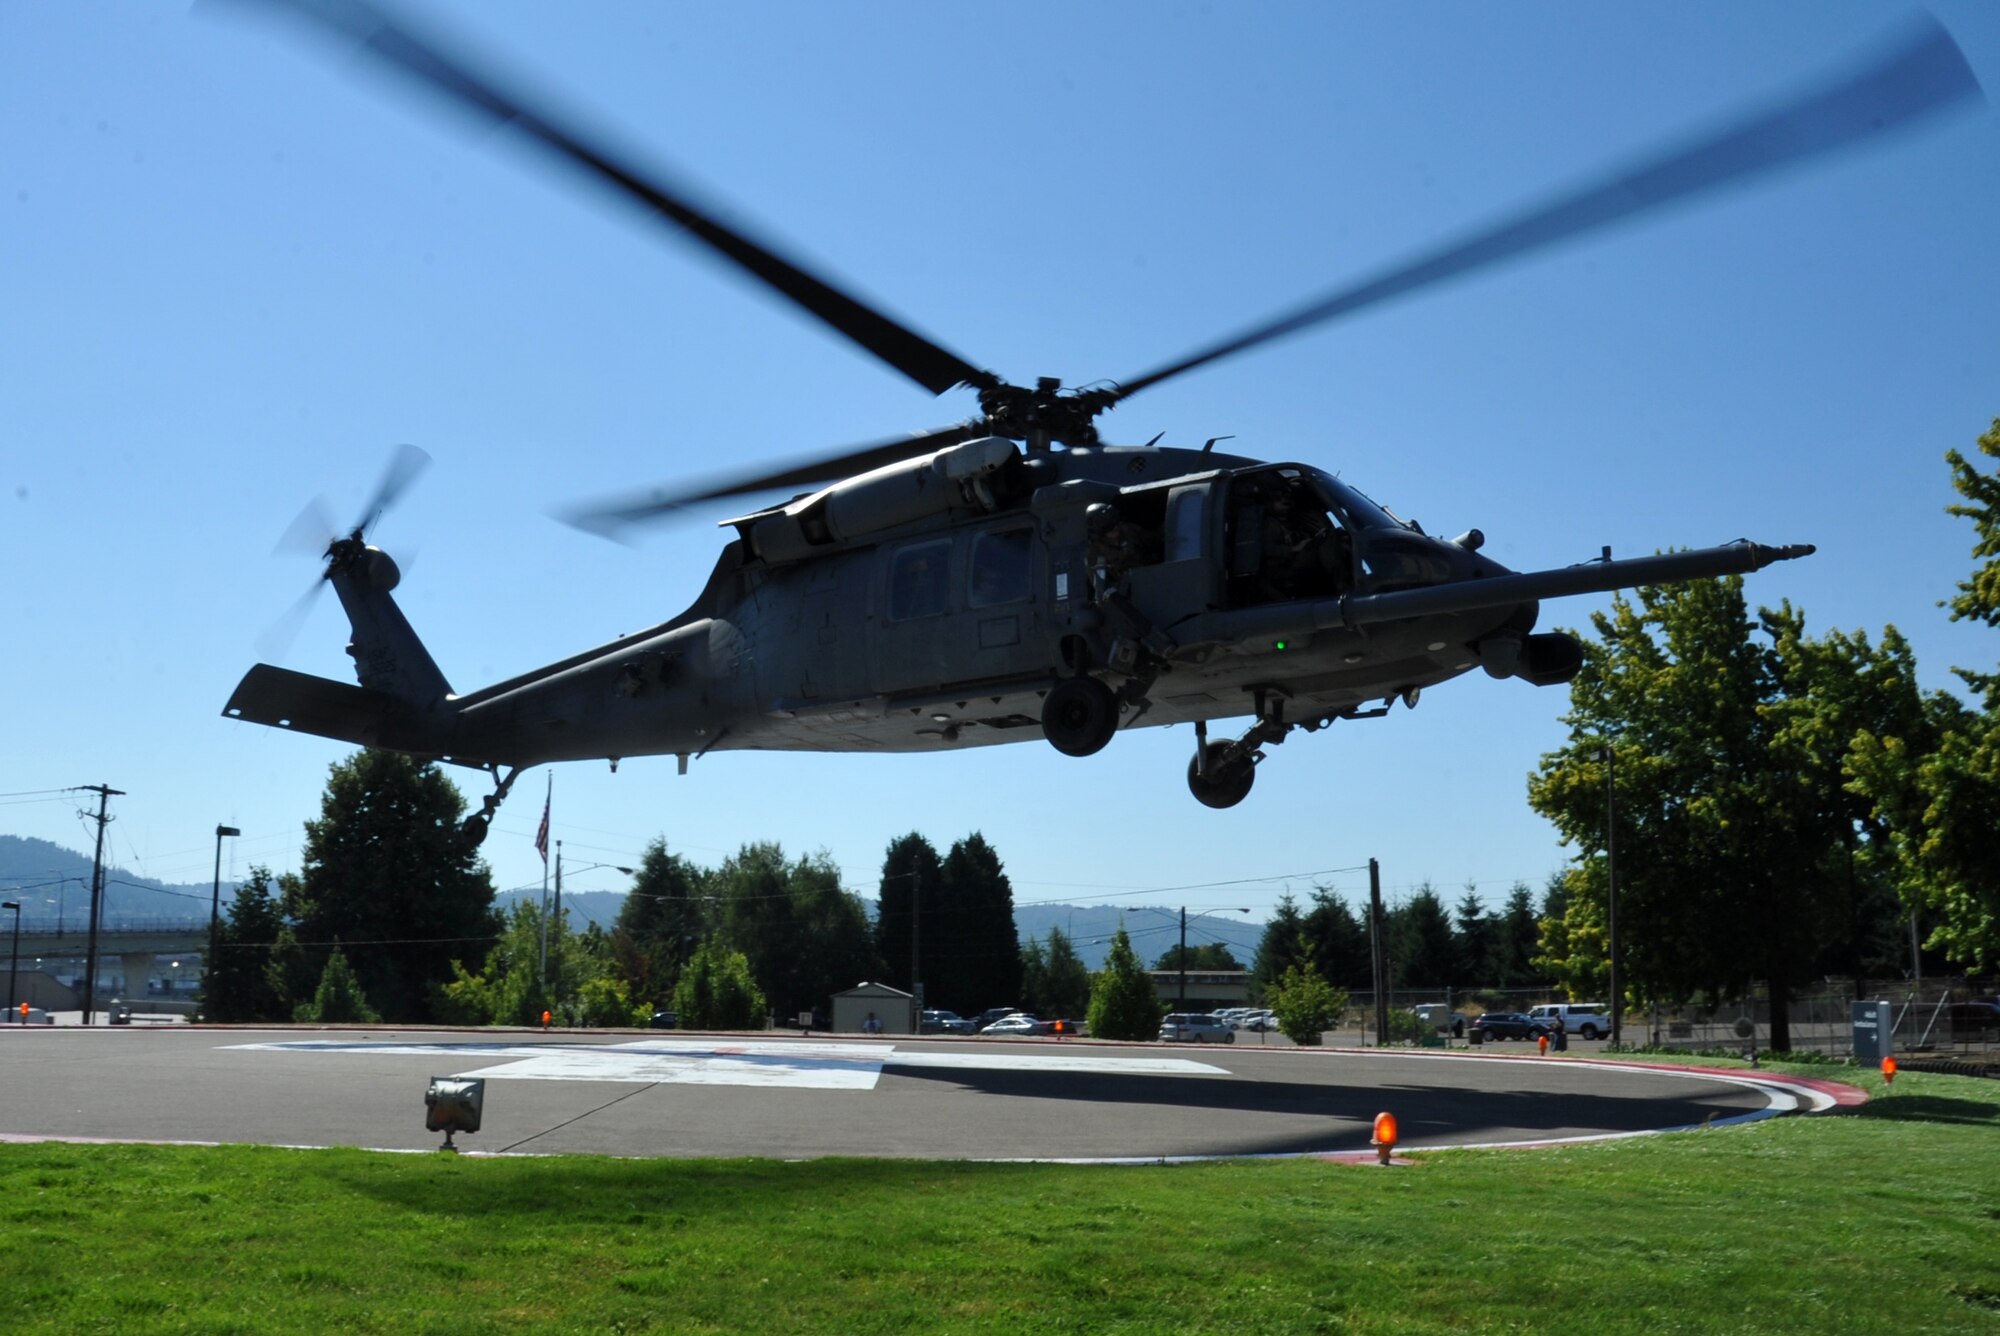 An HH-60 Pave Hawk helicopters from the 305th Rescue Squadron lands at the Randall Children's Hospital at Legacy Emmanuel in Portland, Ore. The heliocopter off-loaded pararescuemen from the 304th Rescue Squadron as they delivered toy's via "Operation Toy Drop". (U.S. AIr Force Photo/ Master Sgt. Luke Johnson) 